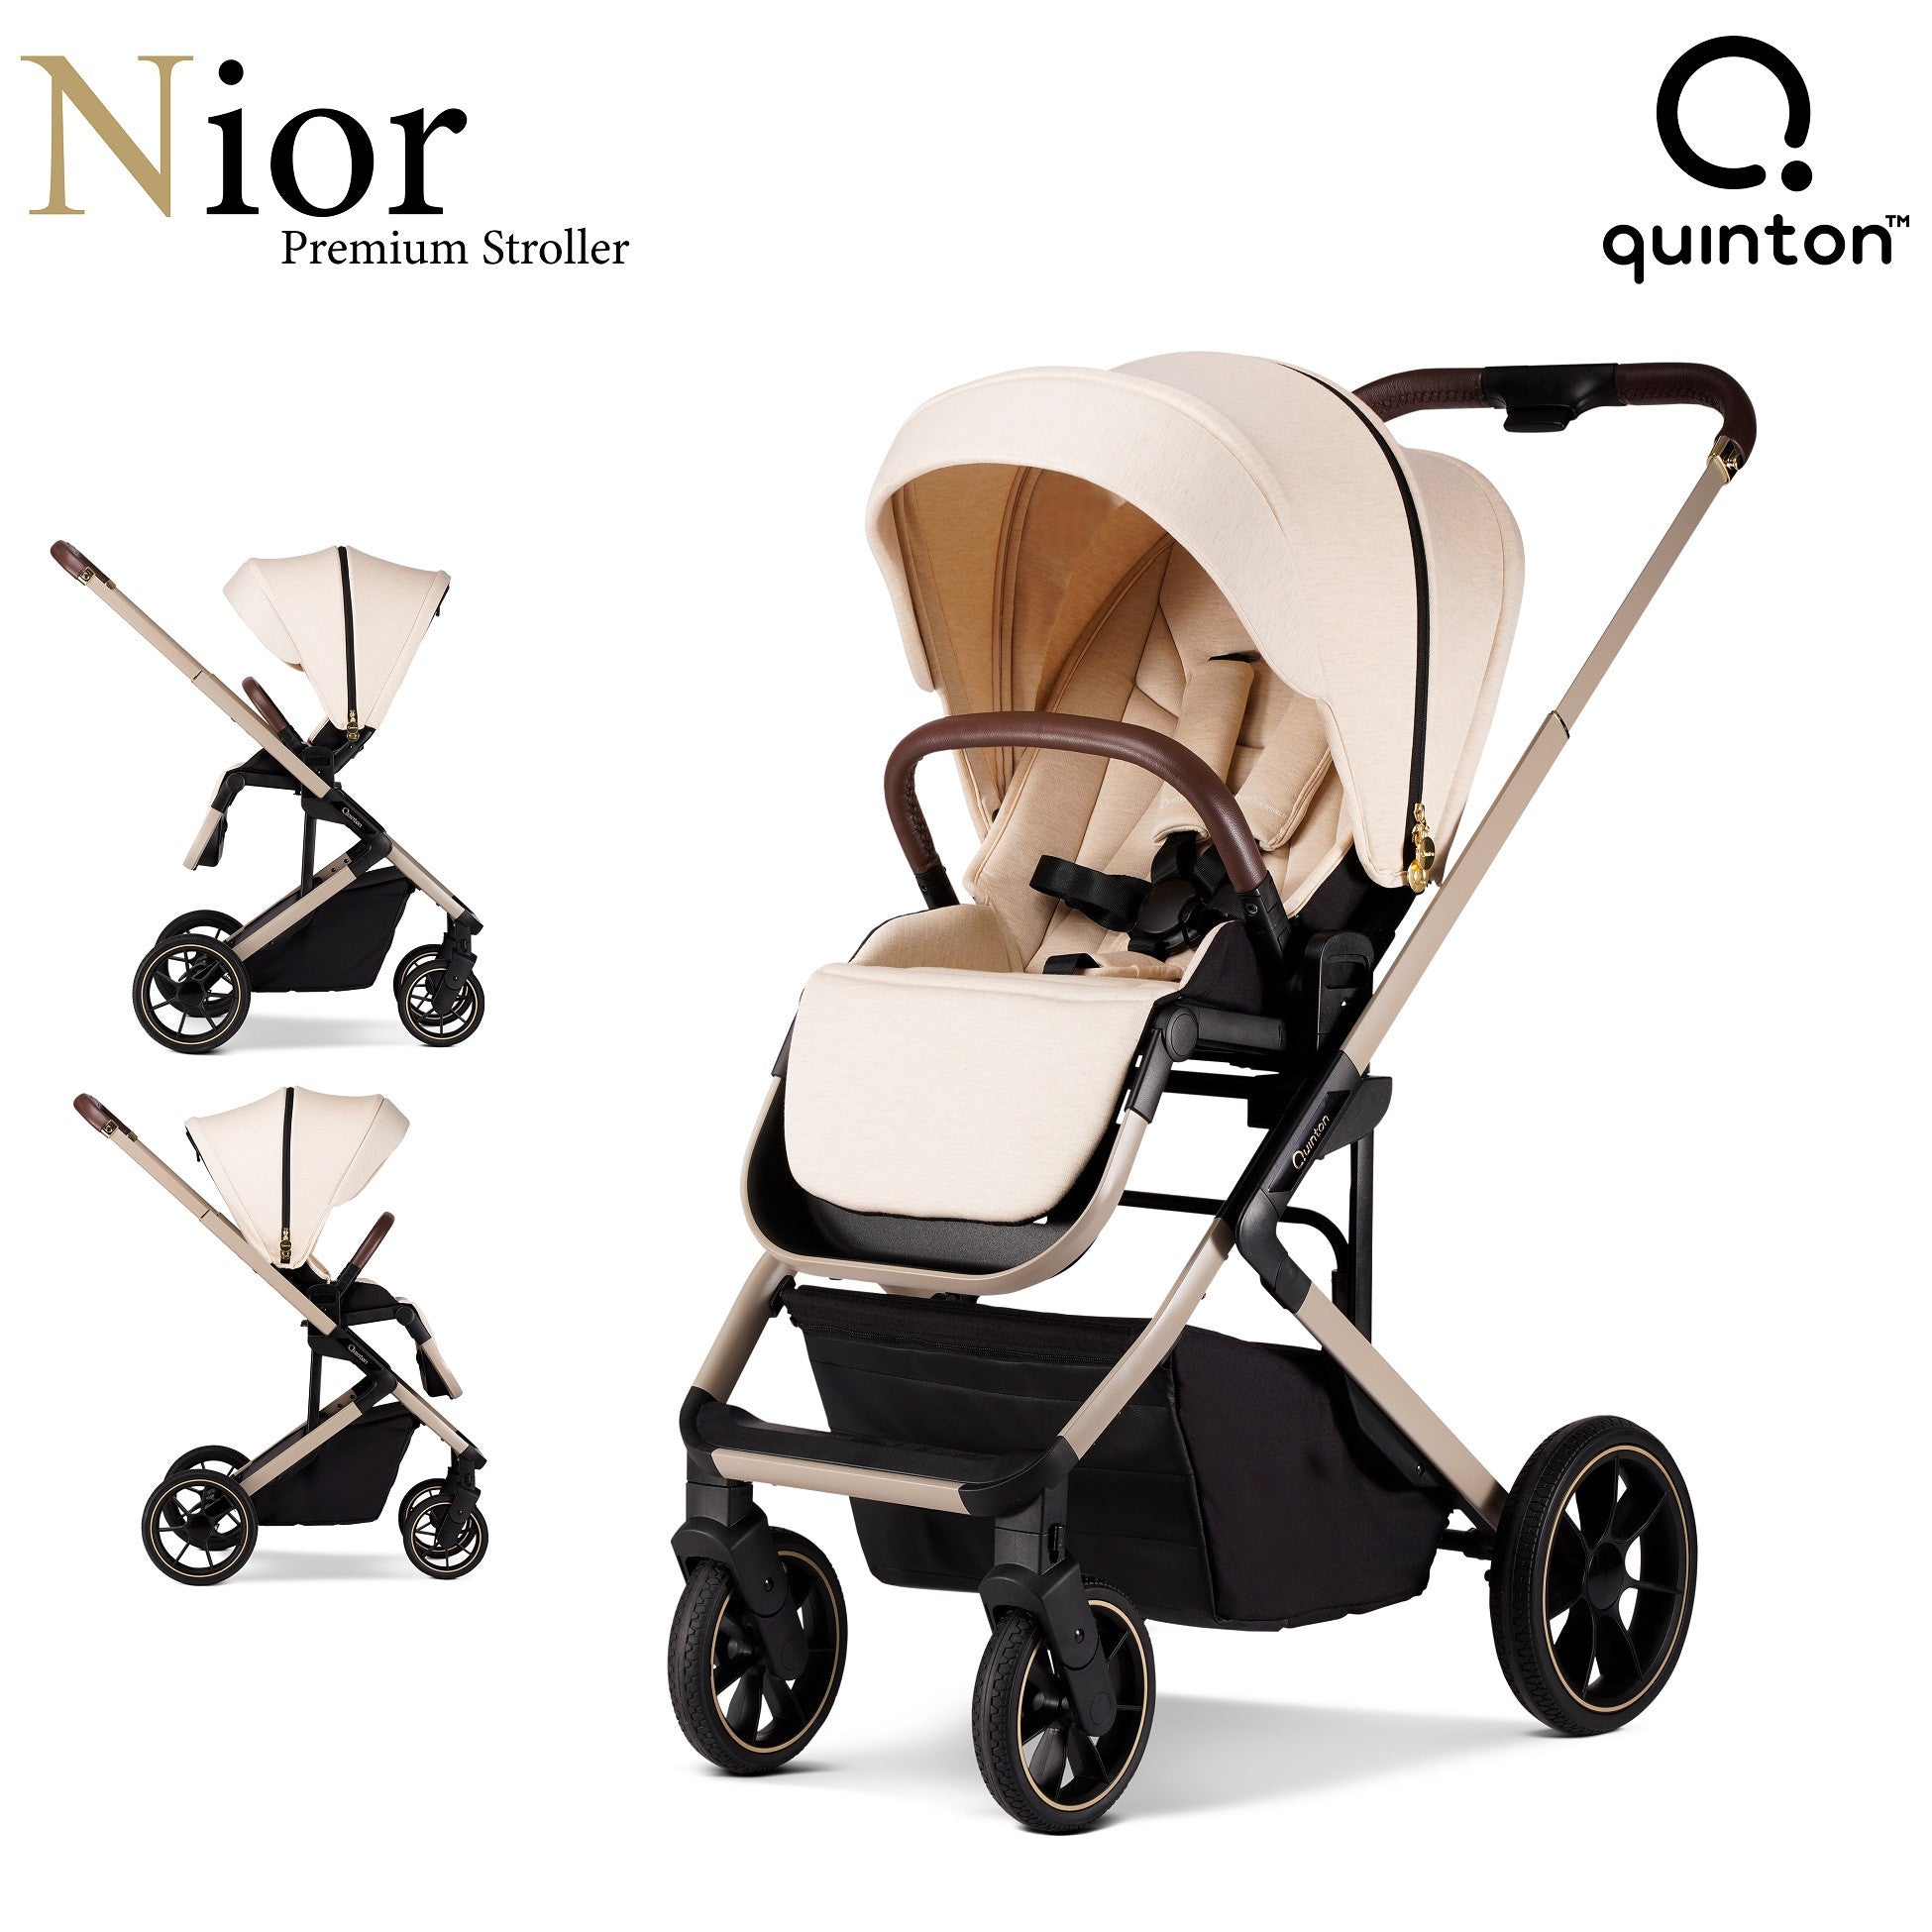 Quinton Nior Premium Baby Stroller Reversible 2-way Parent & World Facing, Travel System, Luggage Concept, Ultra Comfort Rubber Wheels & With Free Mama Bag